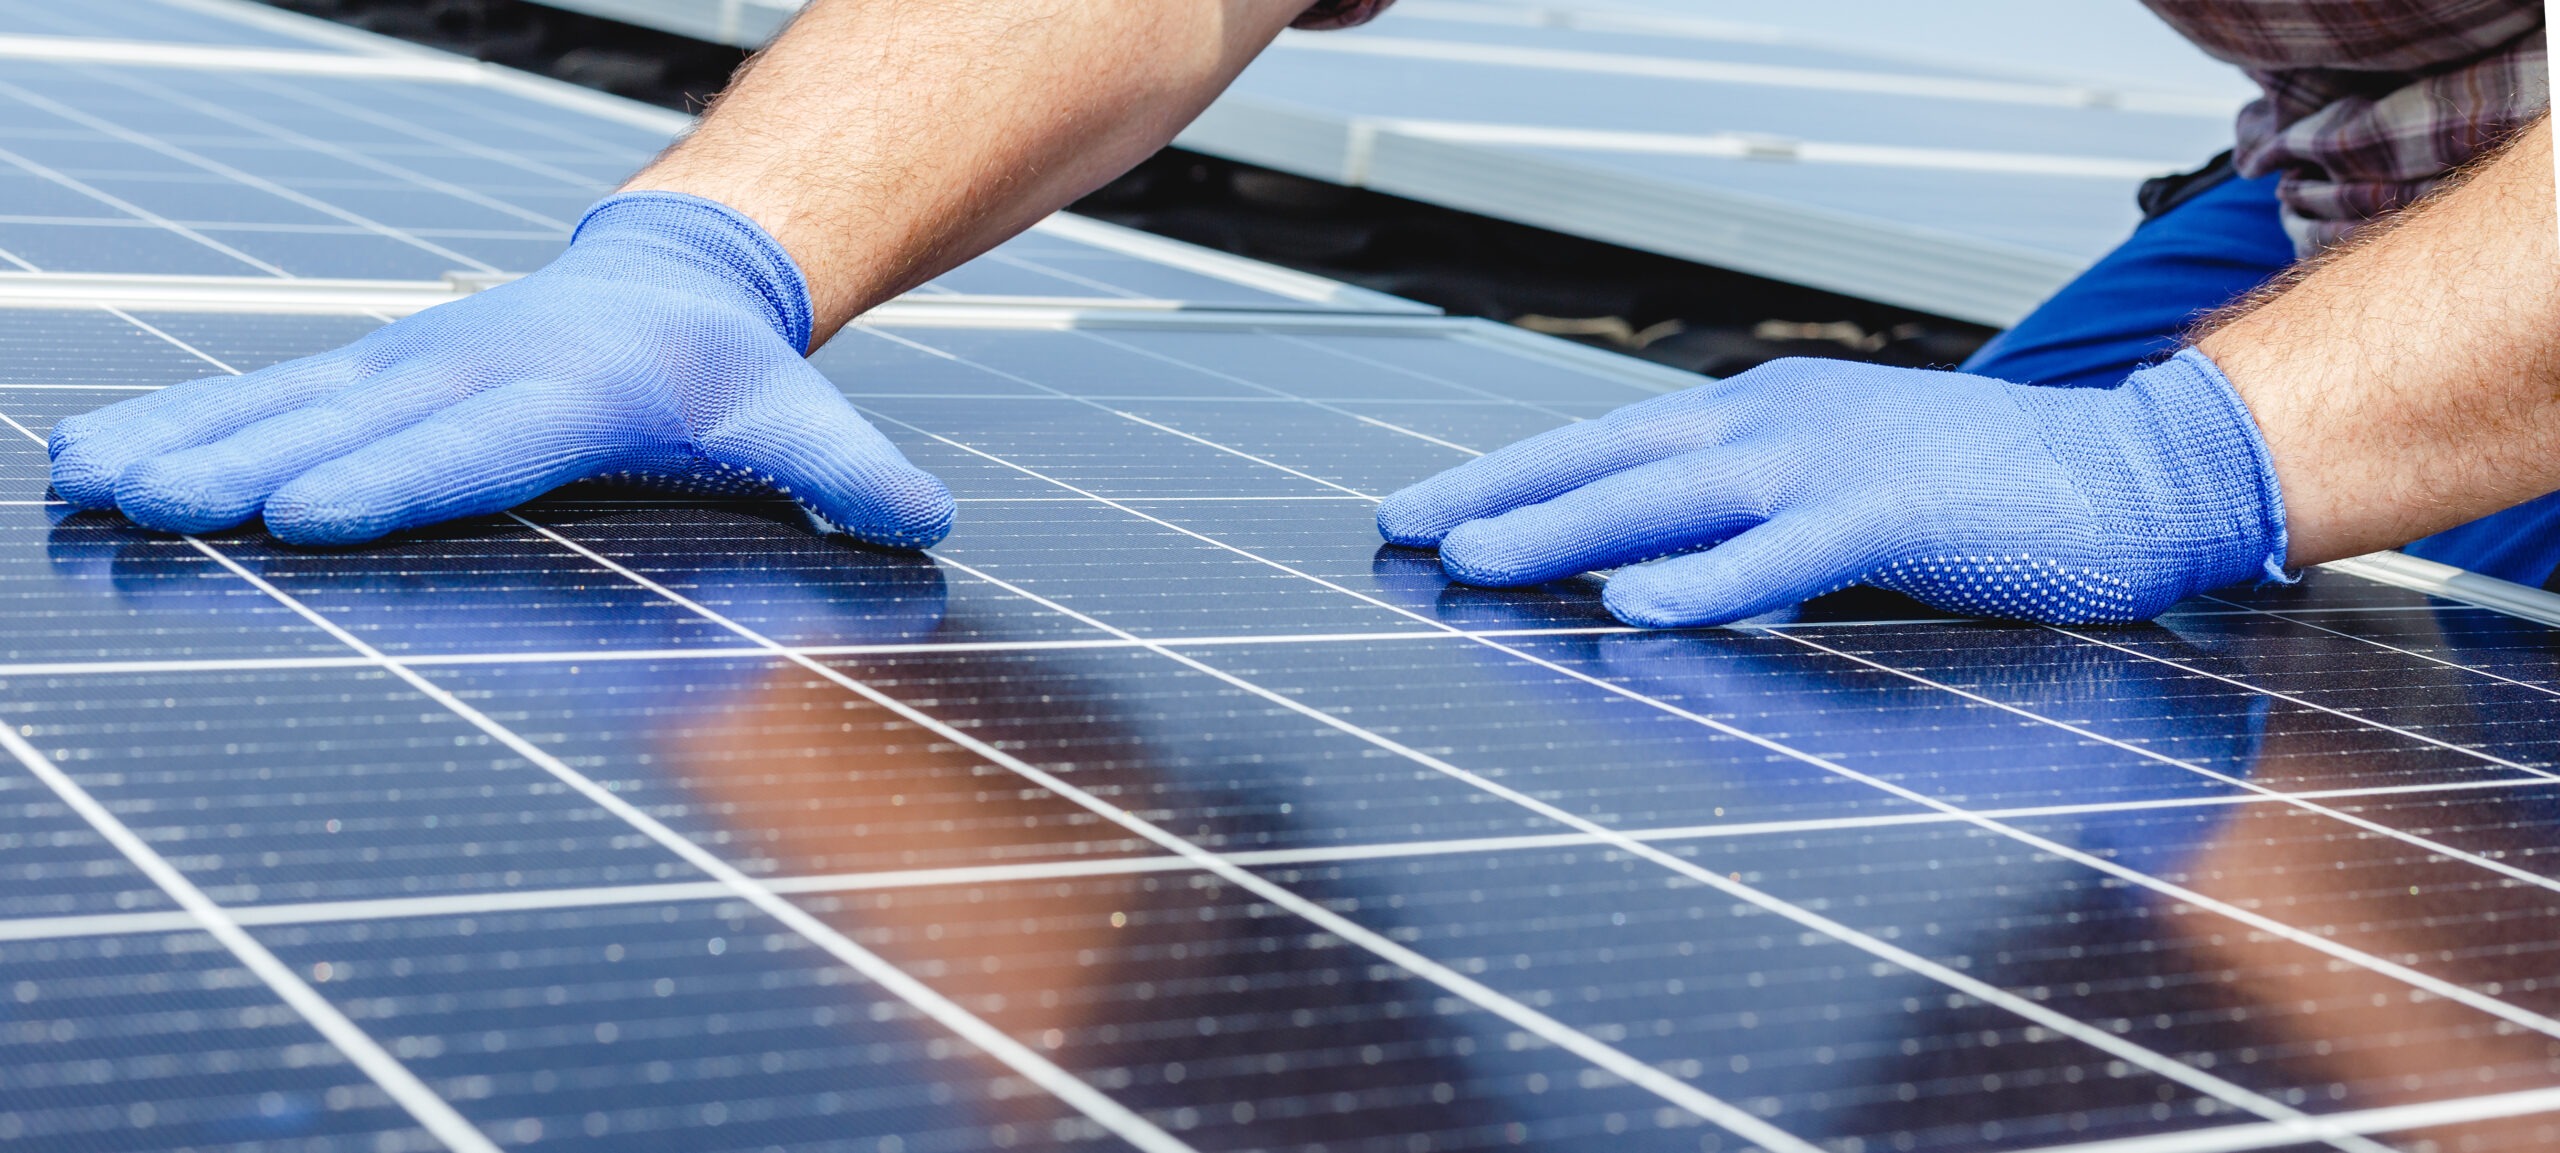 Male worker hands in glows on solar panel, technician installing solar panels on roof. Alternative energy sun energy power, ecological concept. Long web banner.